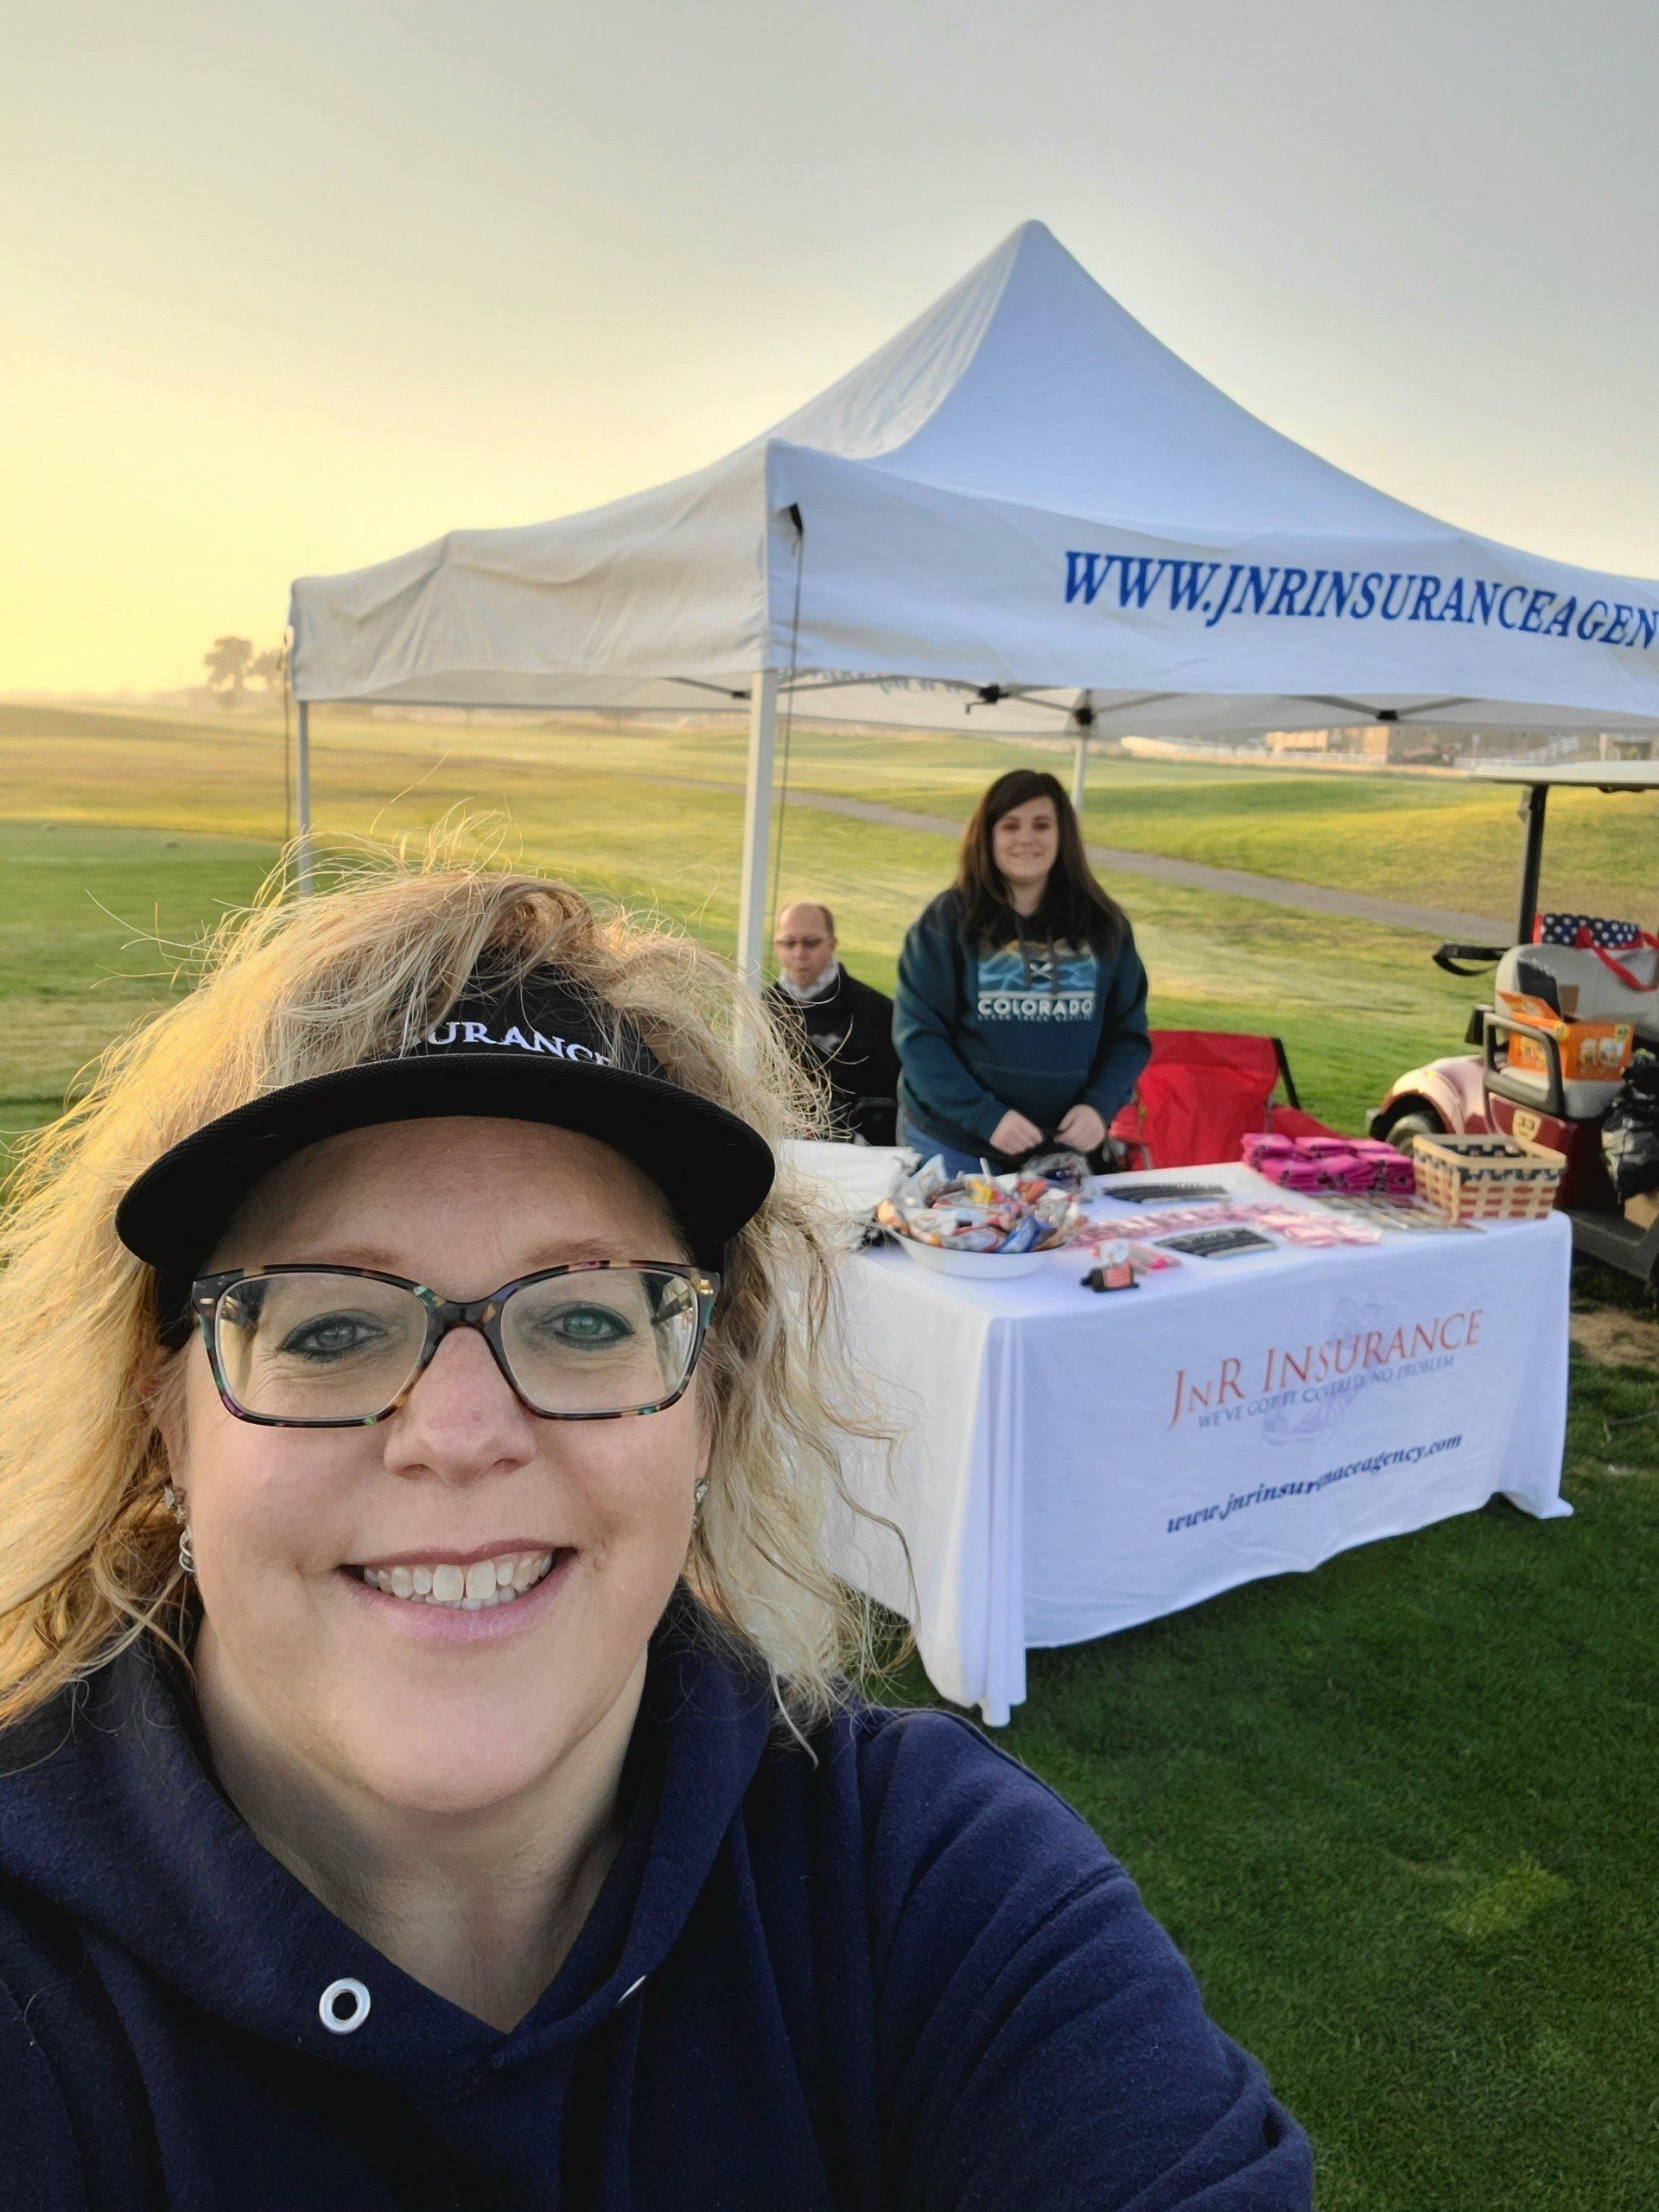 Fort Lupton Trappers Days Golf Tournament Sponsored by JNR Insurance and the Fort Lupton Chamber of